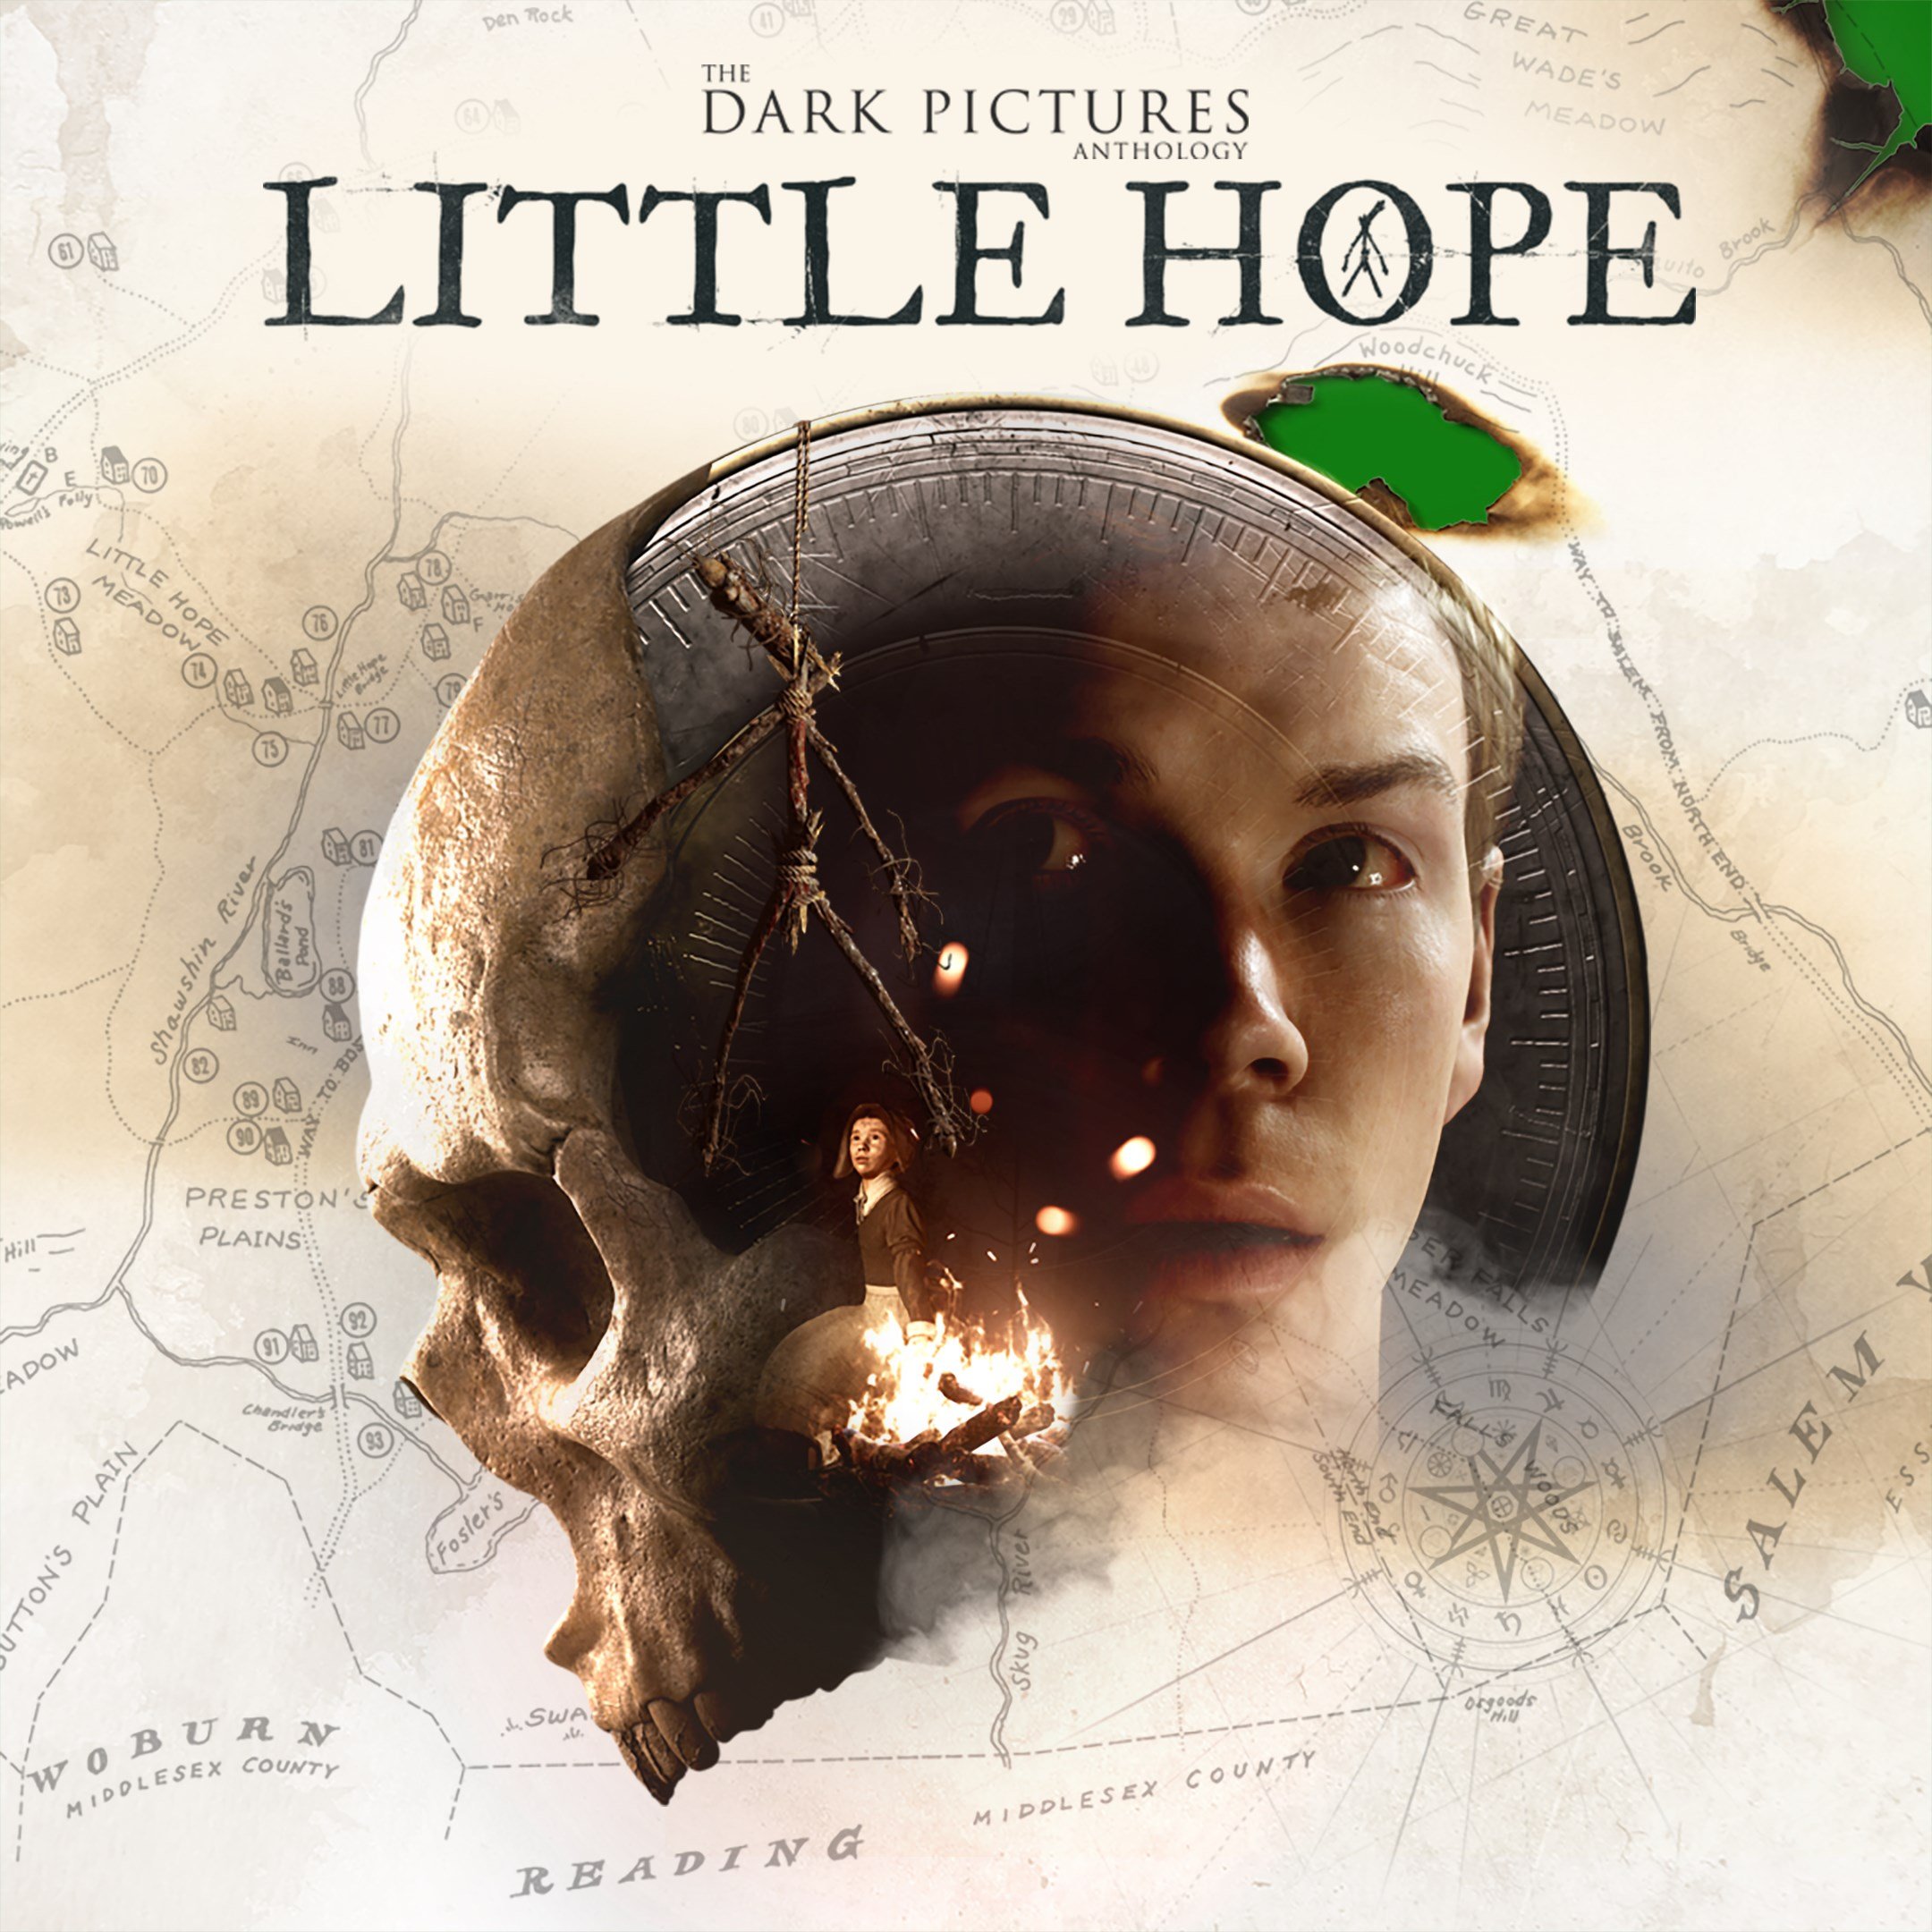 Boxart for The Dark Pictures Anthology: Little Hope